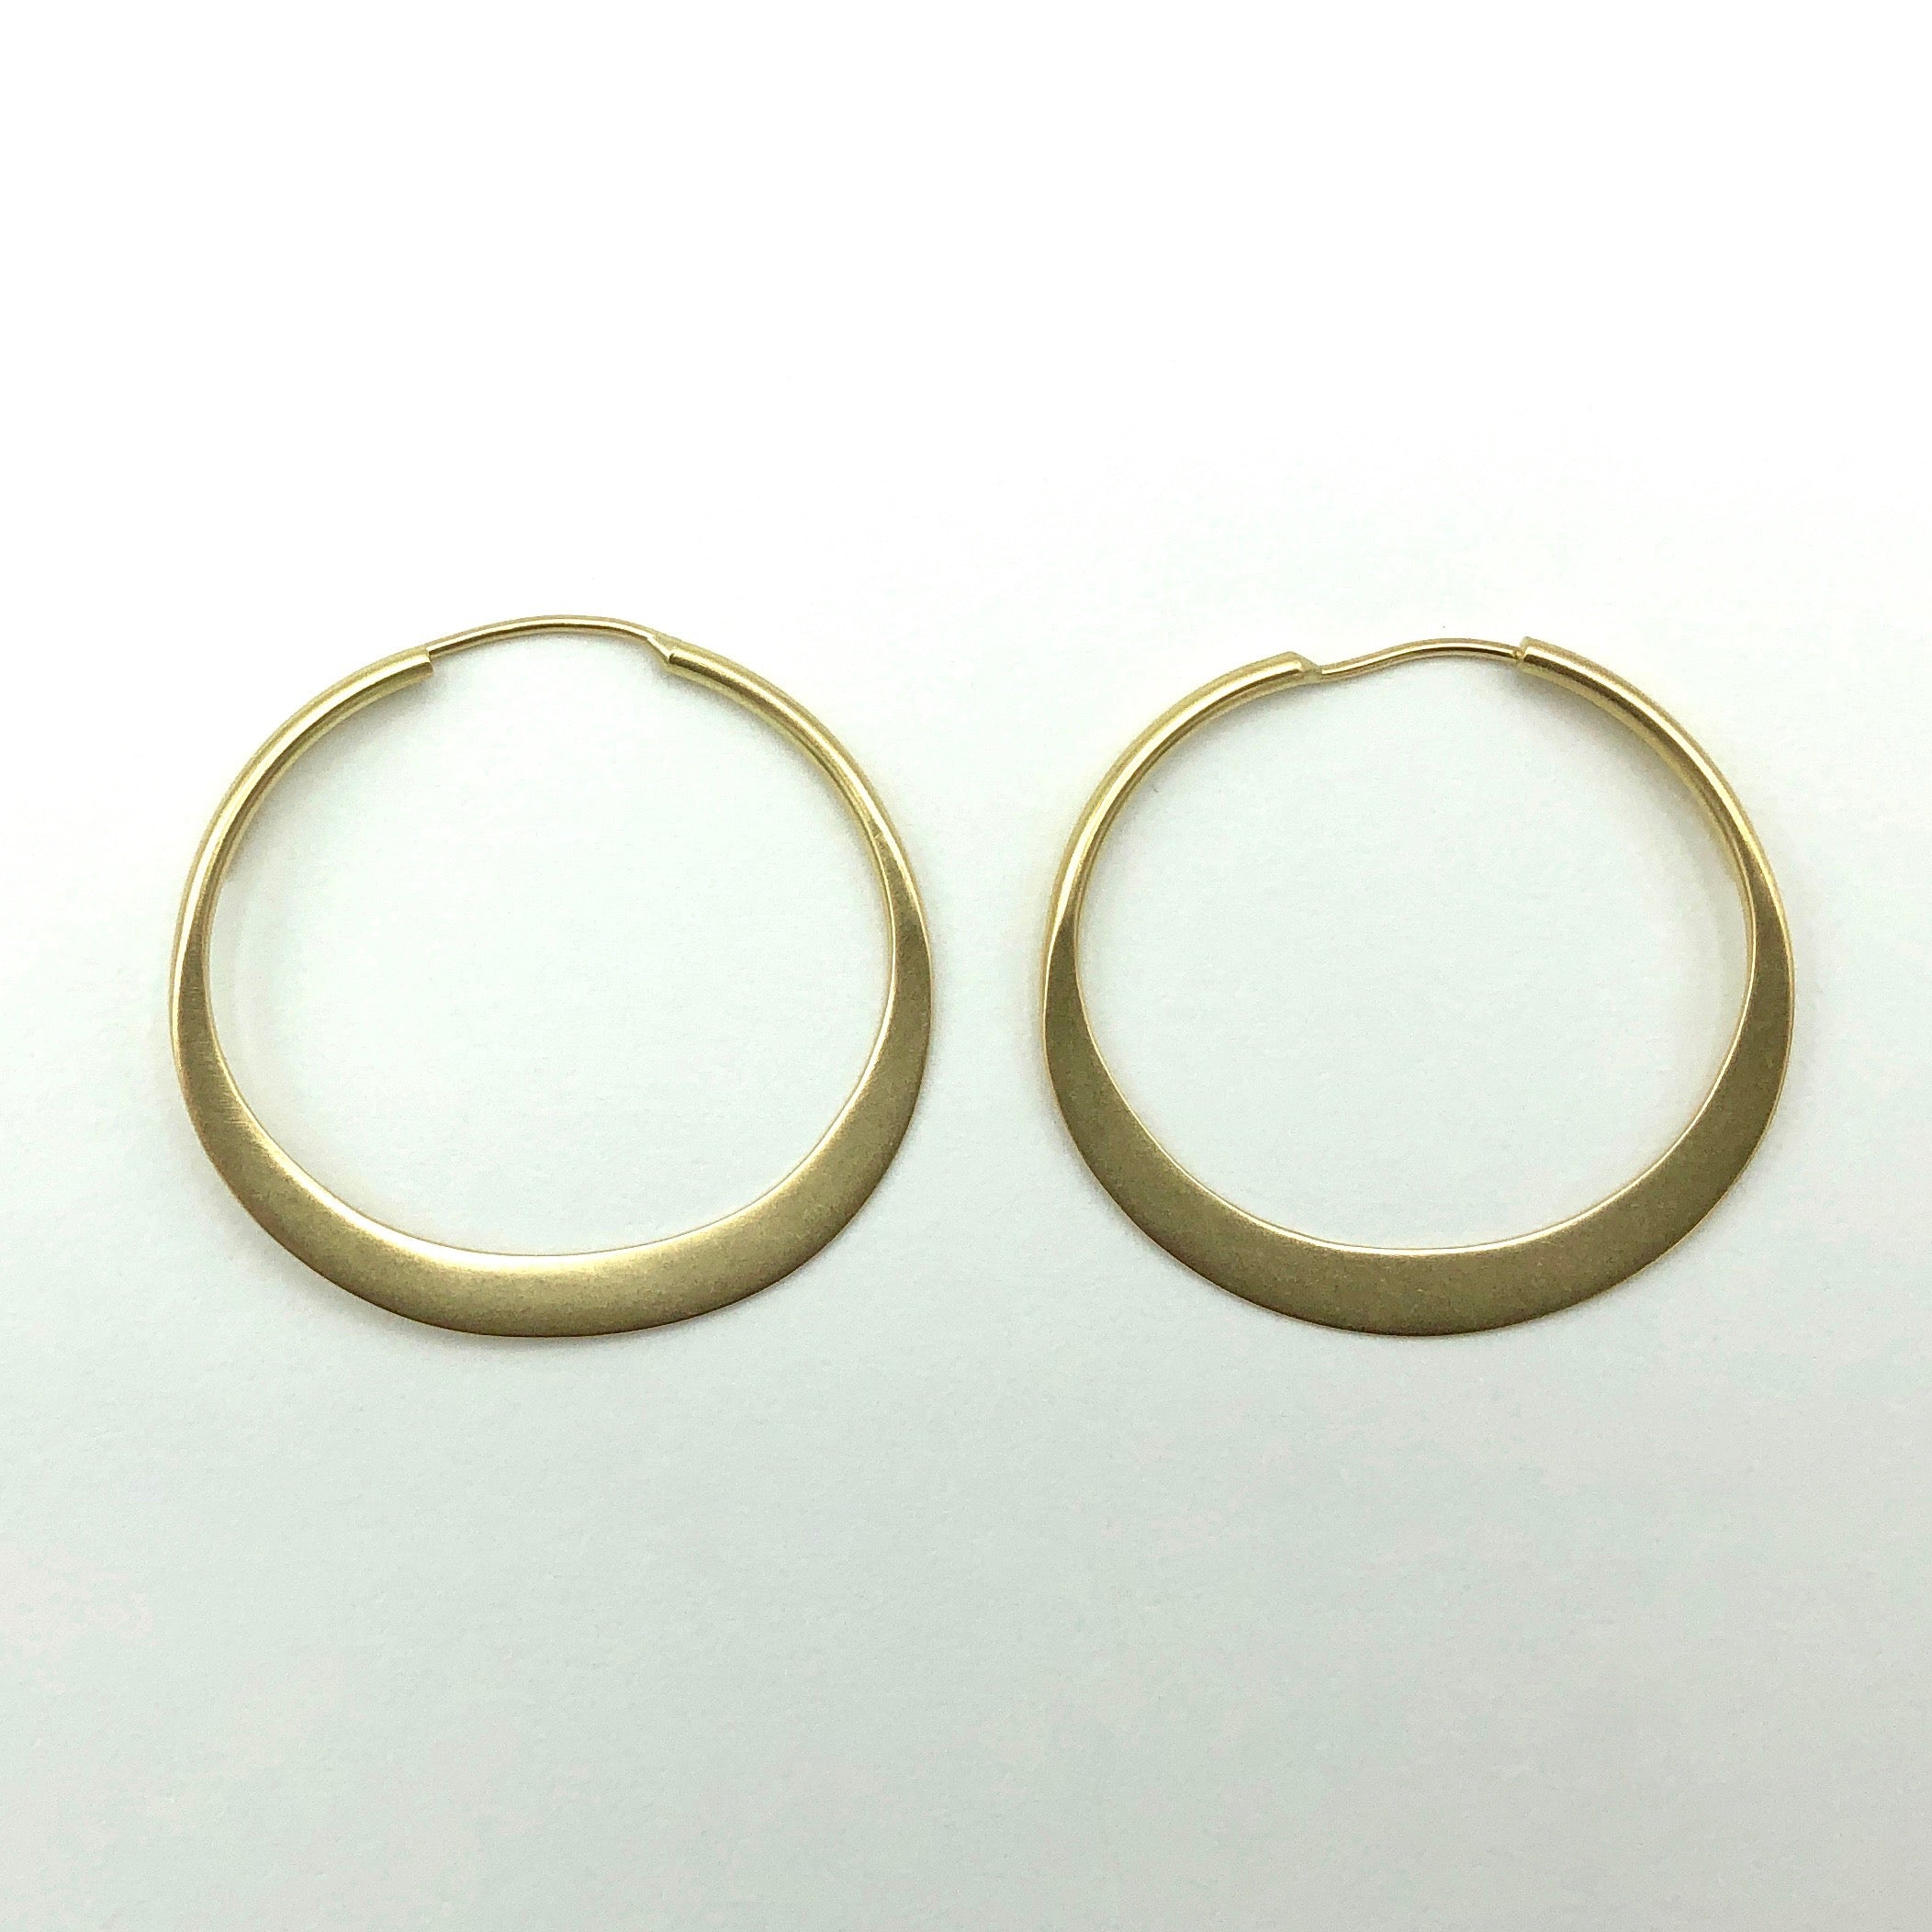 Hand-forged gold hoops